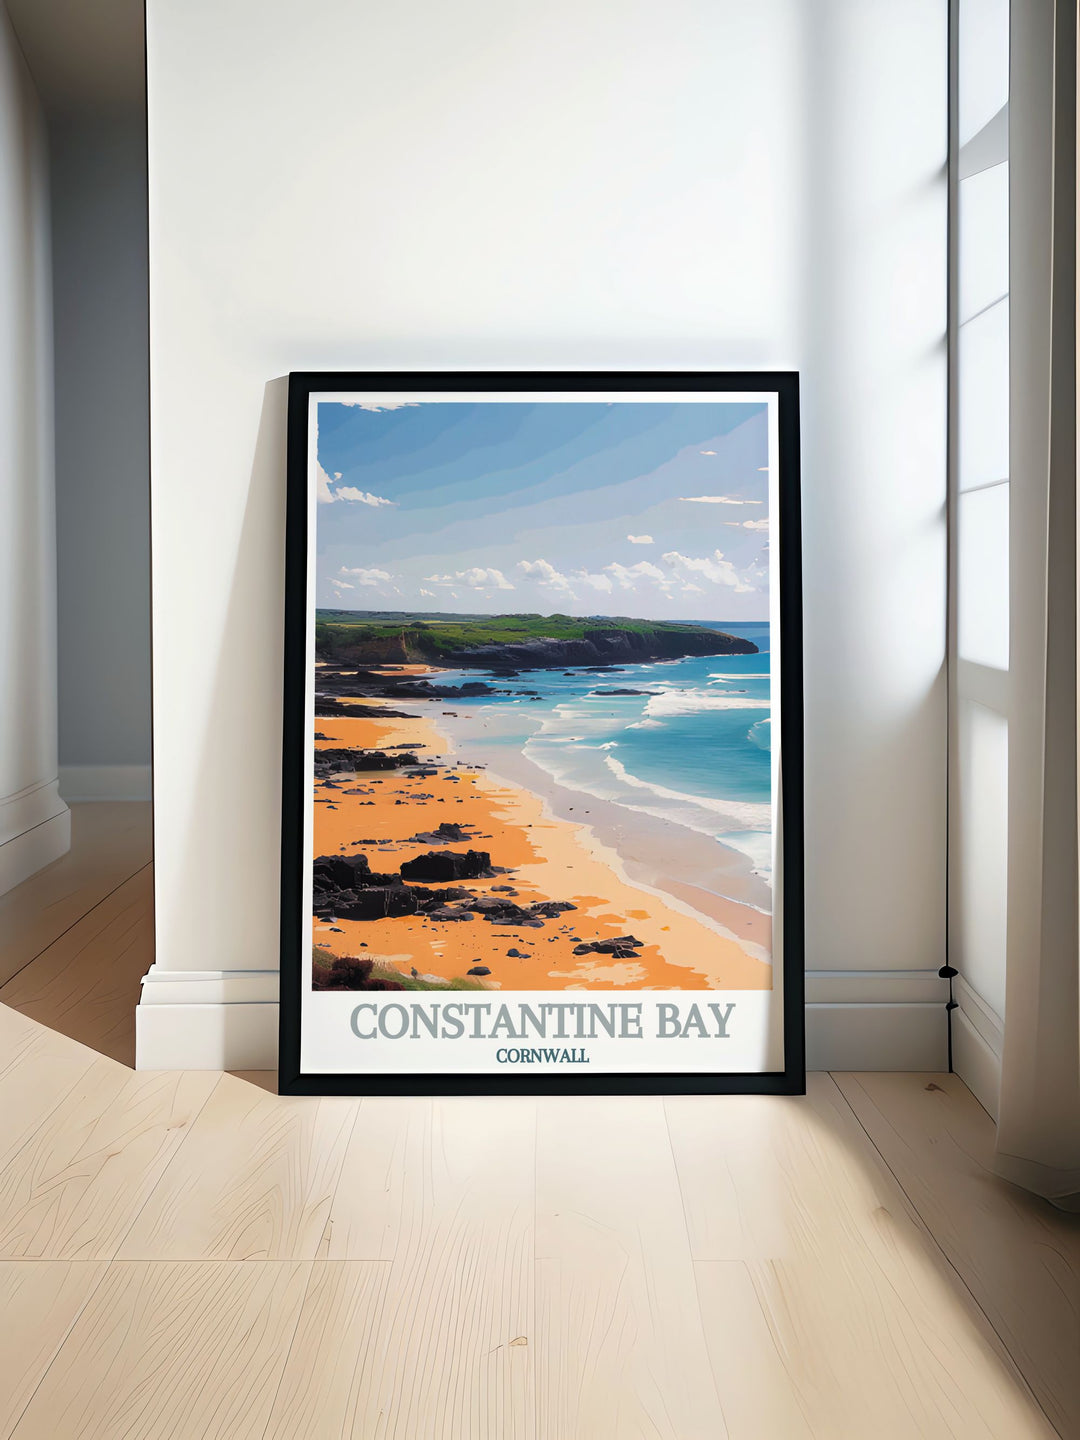 Enjoy the stunning views of Constantine Bay in Cornwall, England, where each visit offers new perspectives of the Atlantic Ocean and lush countryside. Perfect for photography and outdoor activities, this bay is a must see for nature enthusiasts.